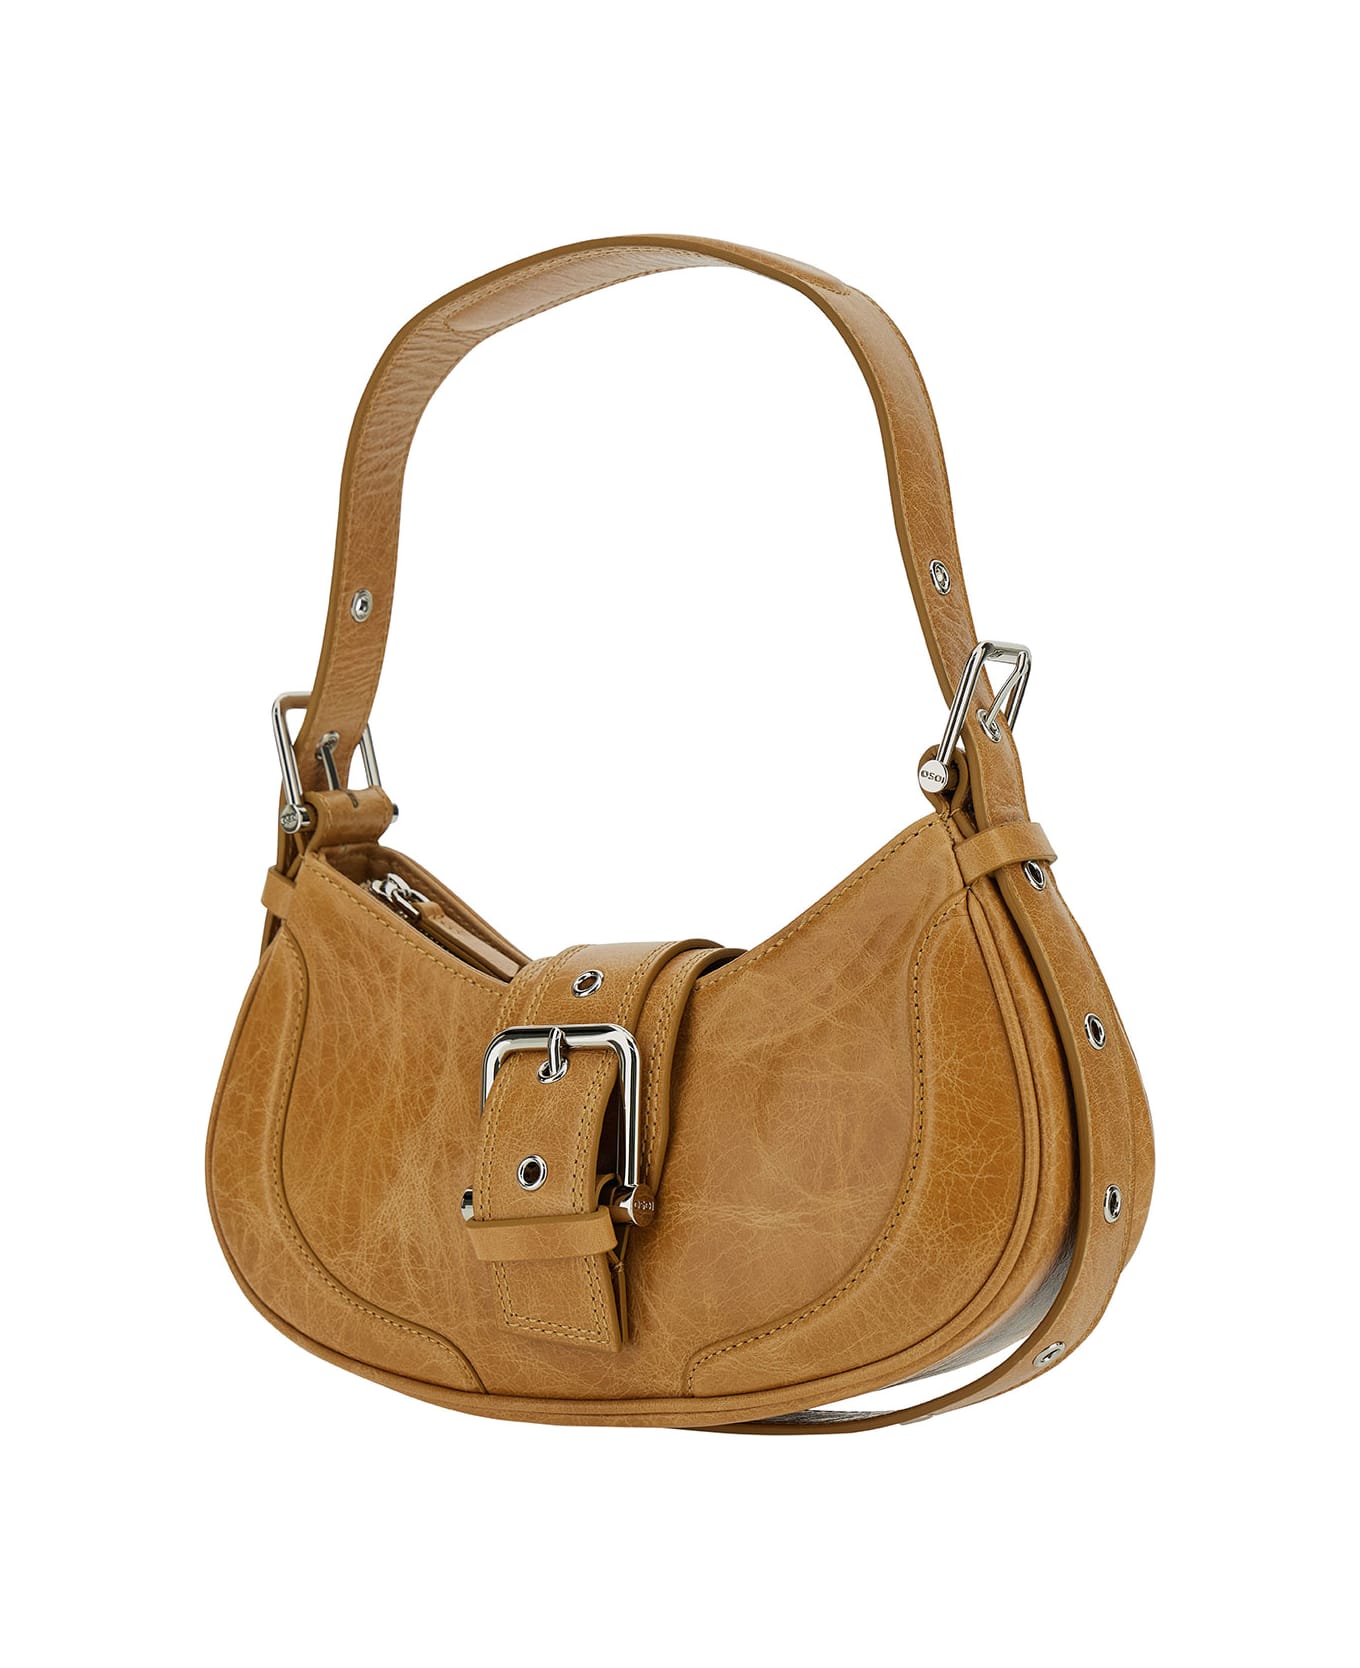 OSOI 'hobo Brocle' Brown Shoulder Bag In Hammered Leather Woman - Beige